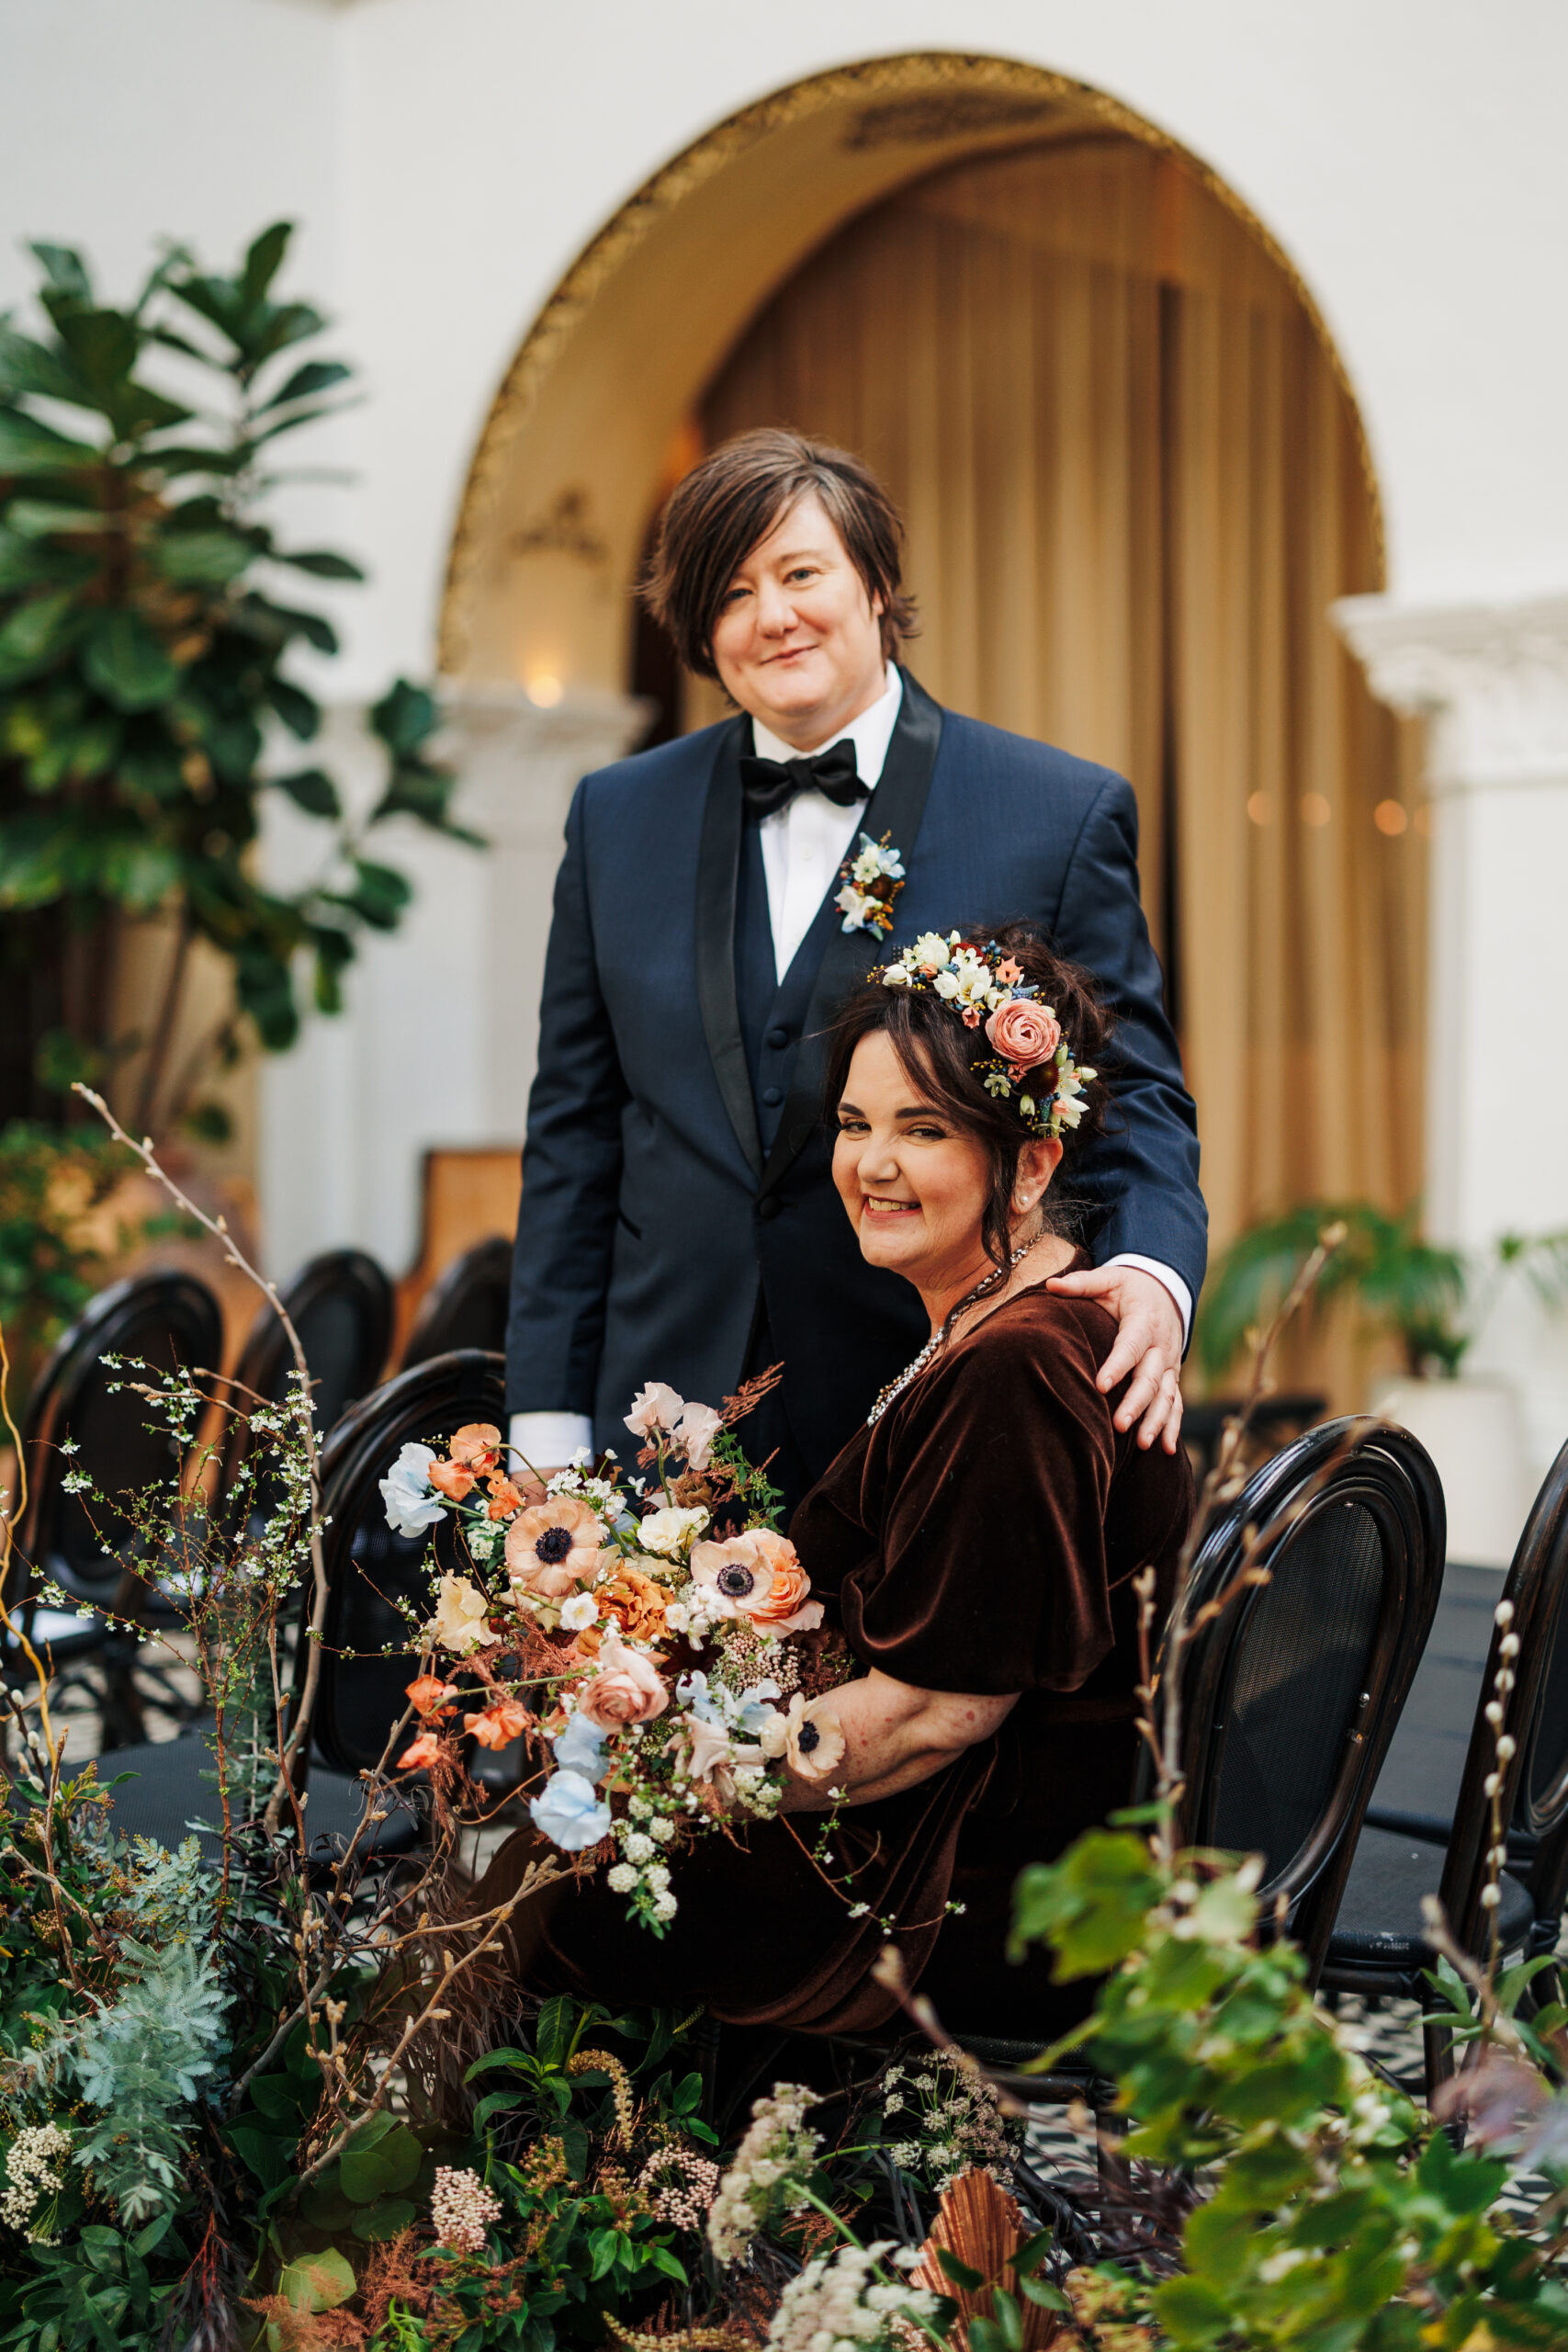 Two women, one sitting one standing surrounded by flowers on their wedding day.